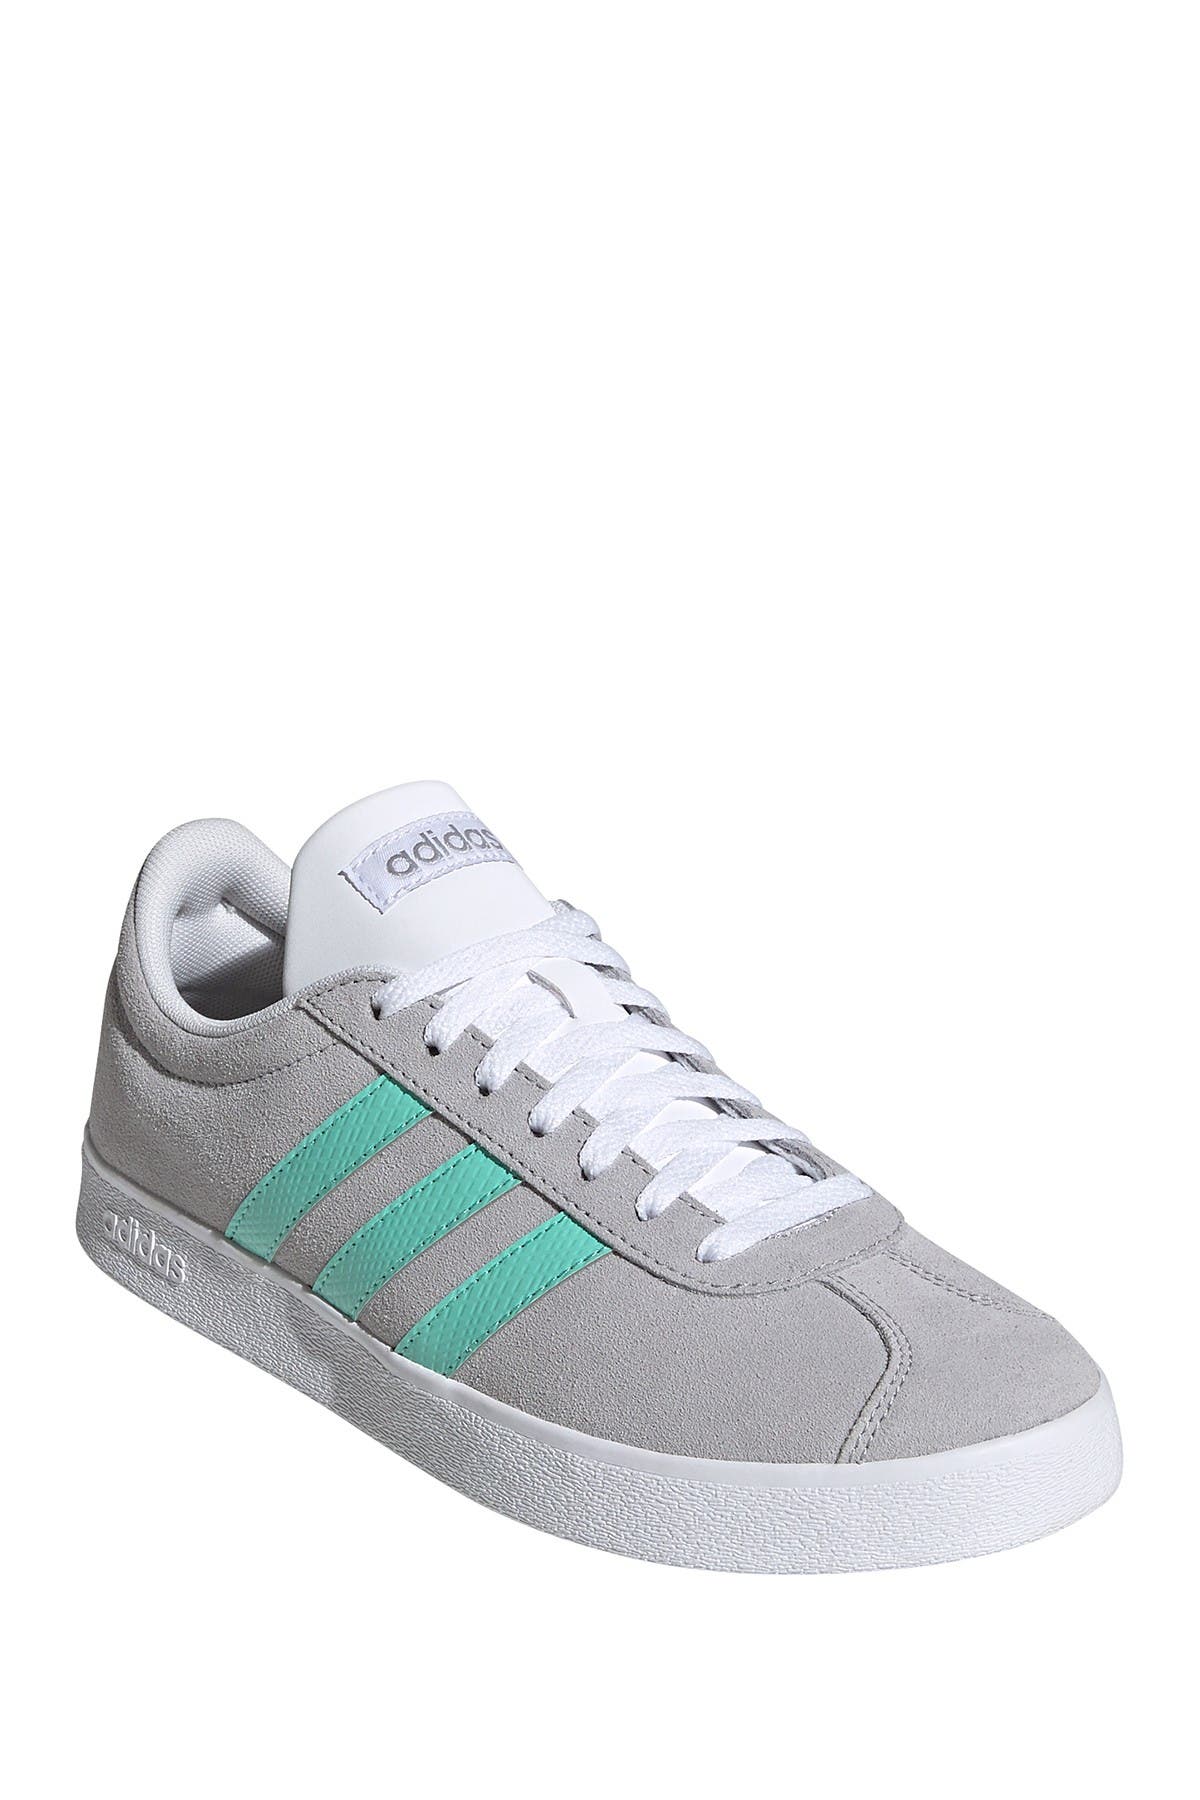 adidas vl court sneakers